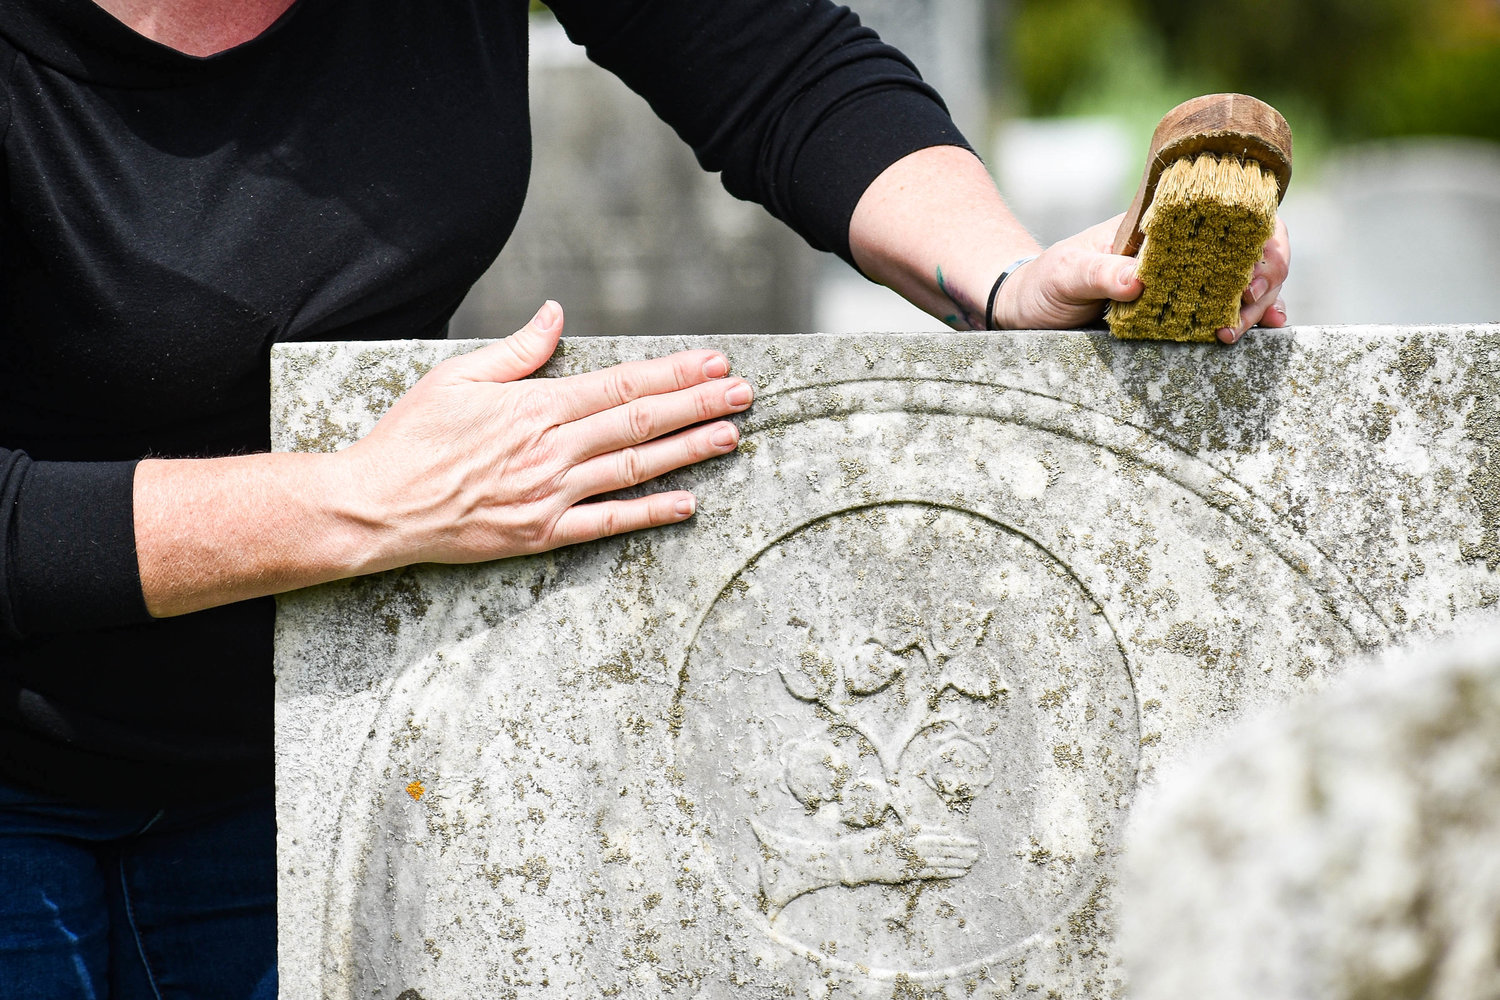 Megan Barnes inspects a gravestone that has not yet been cleaned at Madison Village Cemetery. The local earth science teacher has gained over 350k followers on TikTok by posting videos of her cleaning gravestones and sharing the stories of the deceased.